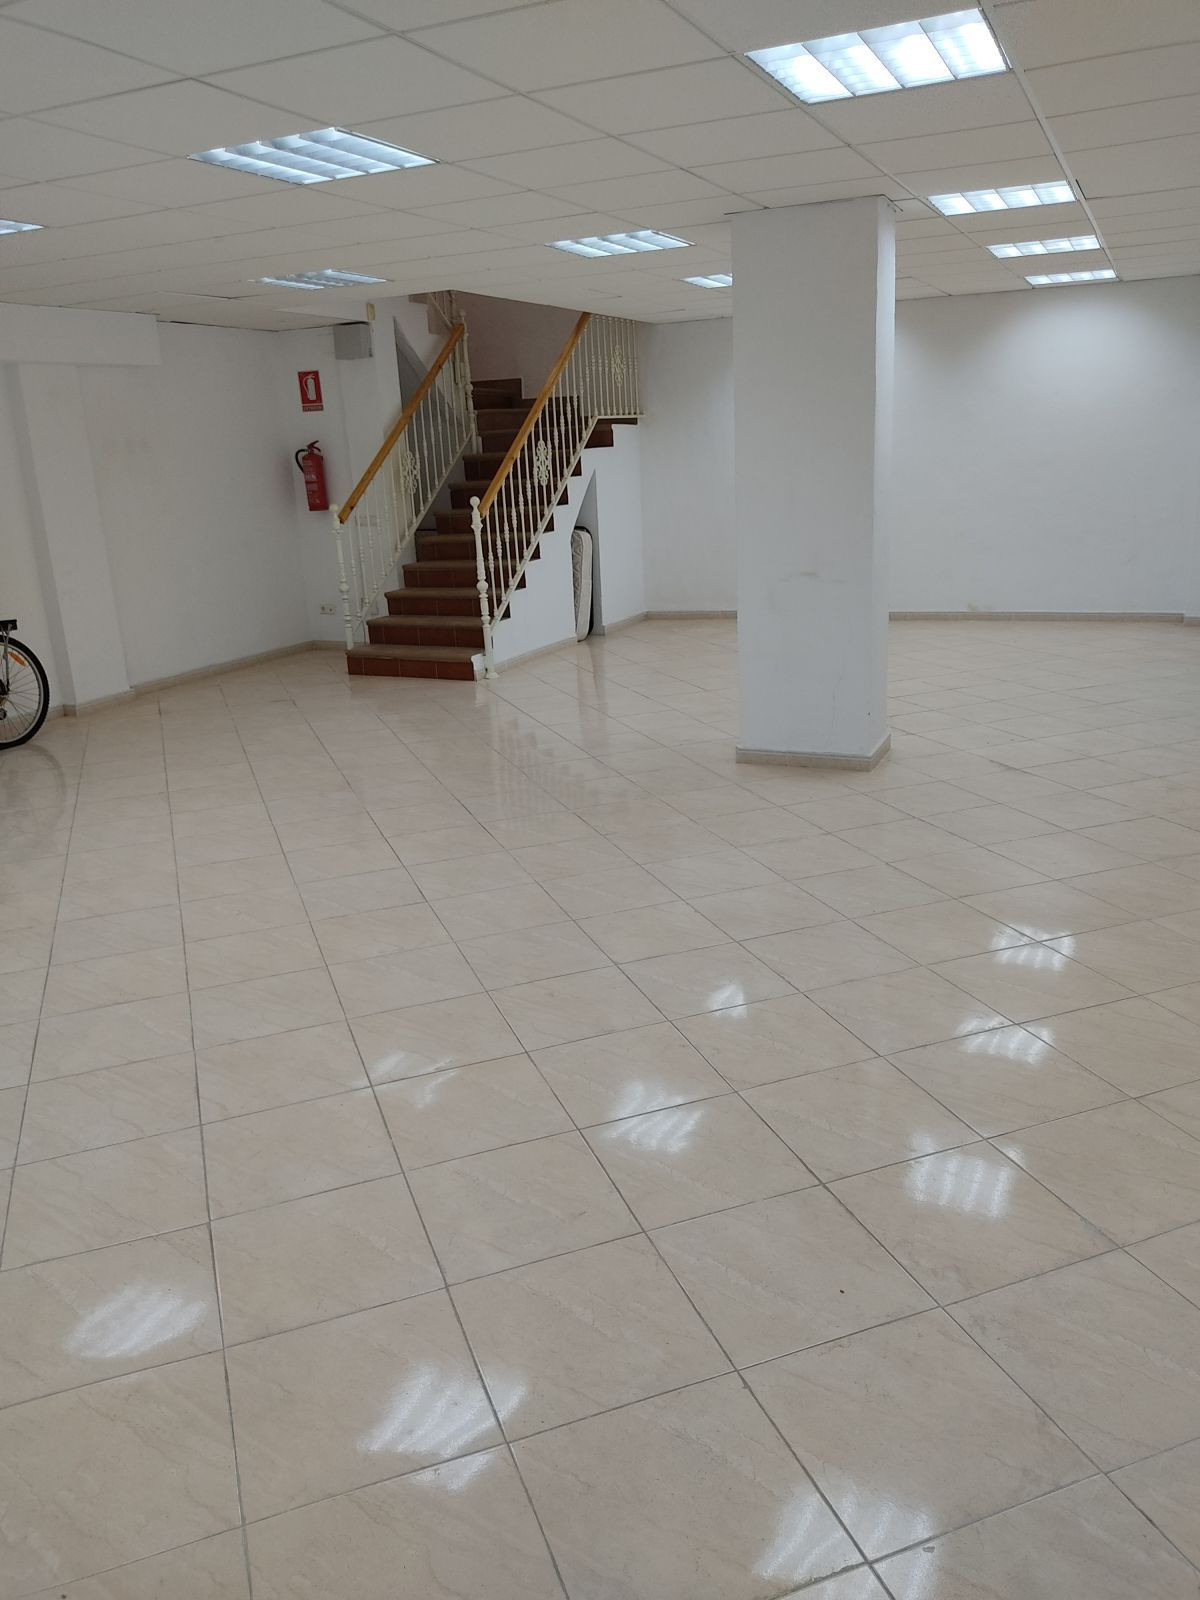 						Commercial  Commercial Premises
													for sale 
																			 in Fuengirola
					